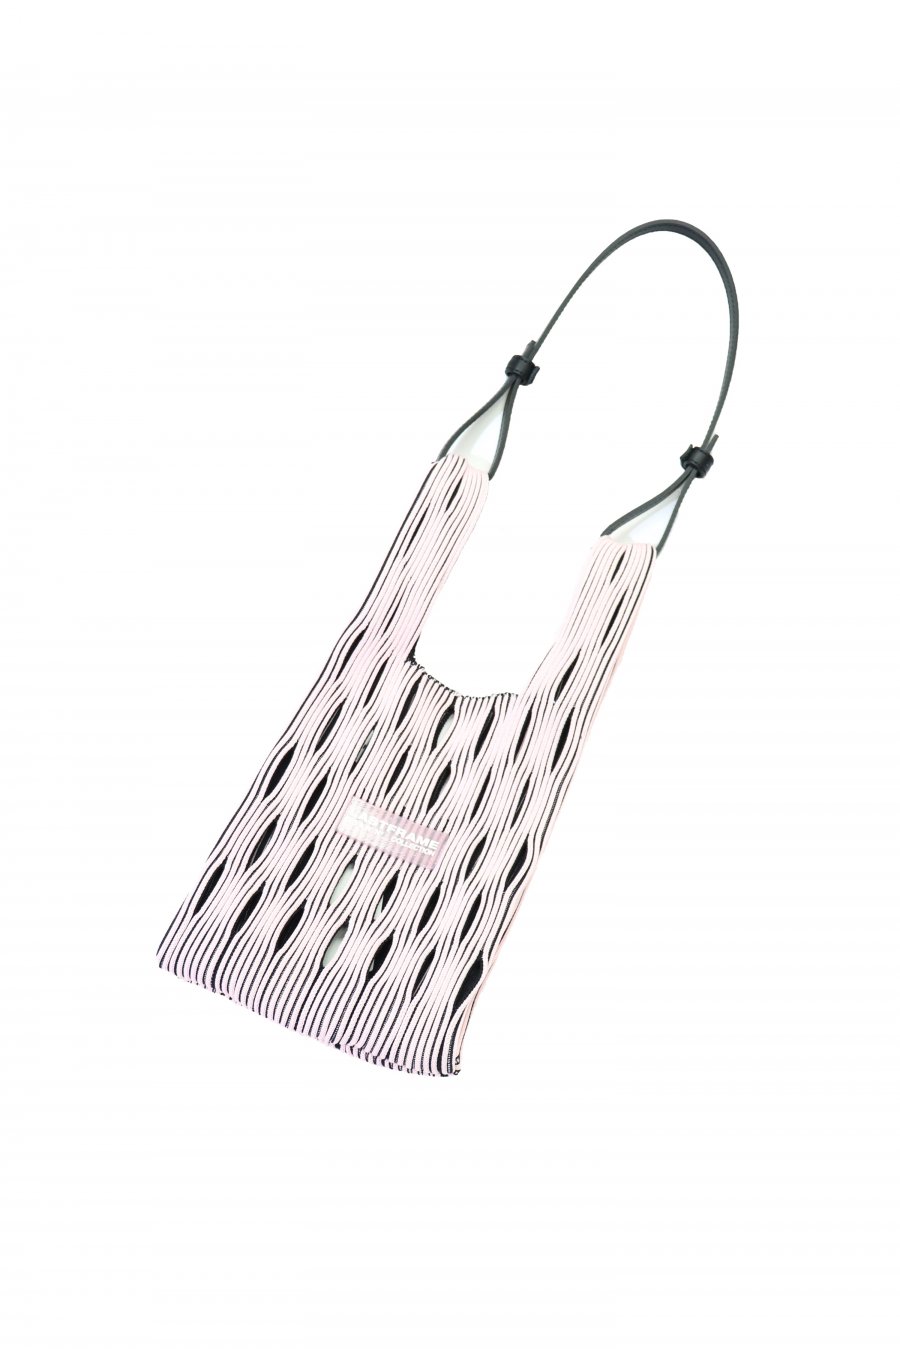 LASTFRAME  TWO TONE MESH MARKET BAG SMALL (LIGHT PINK x BLACK)<img class='new_mark_img2' src='https://img.shop-pro.jp/img/new/icons15.gif' style='border:none;display:inline;margin:0px;padding:0px;width:auto;' />